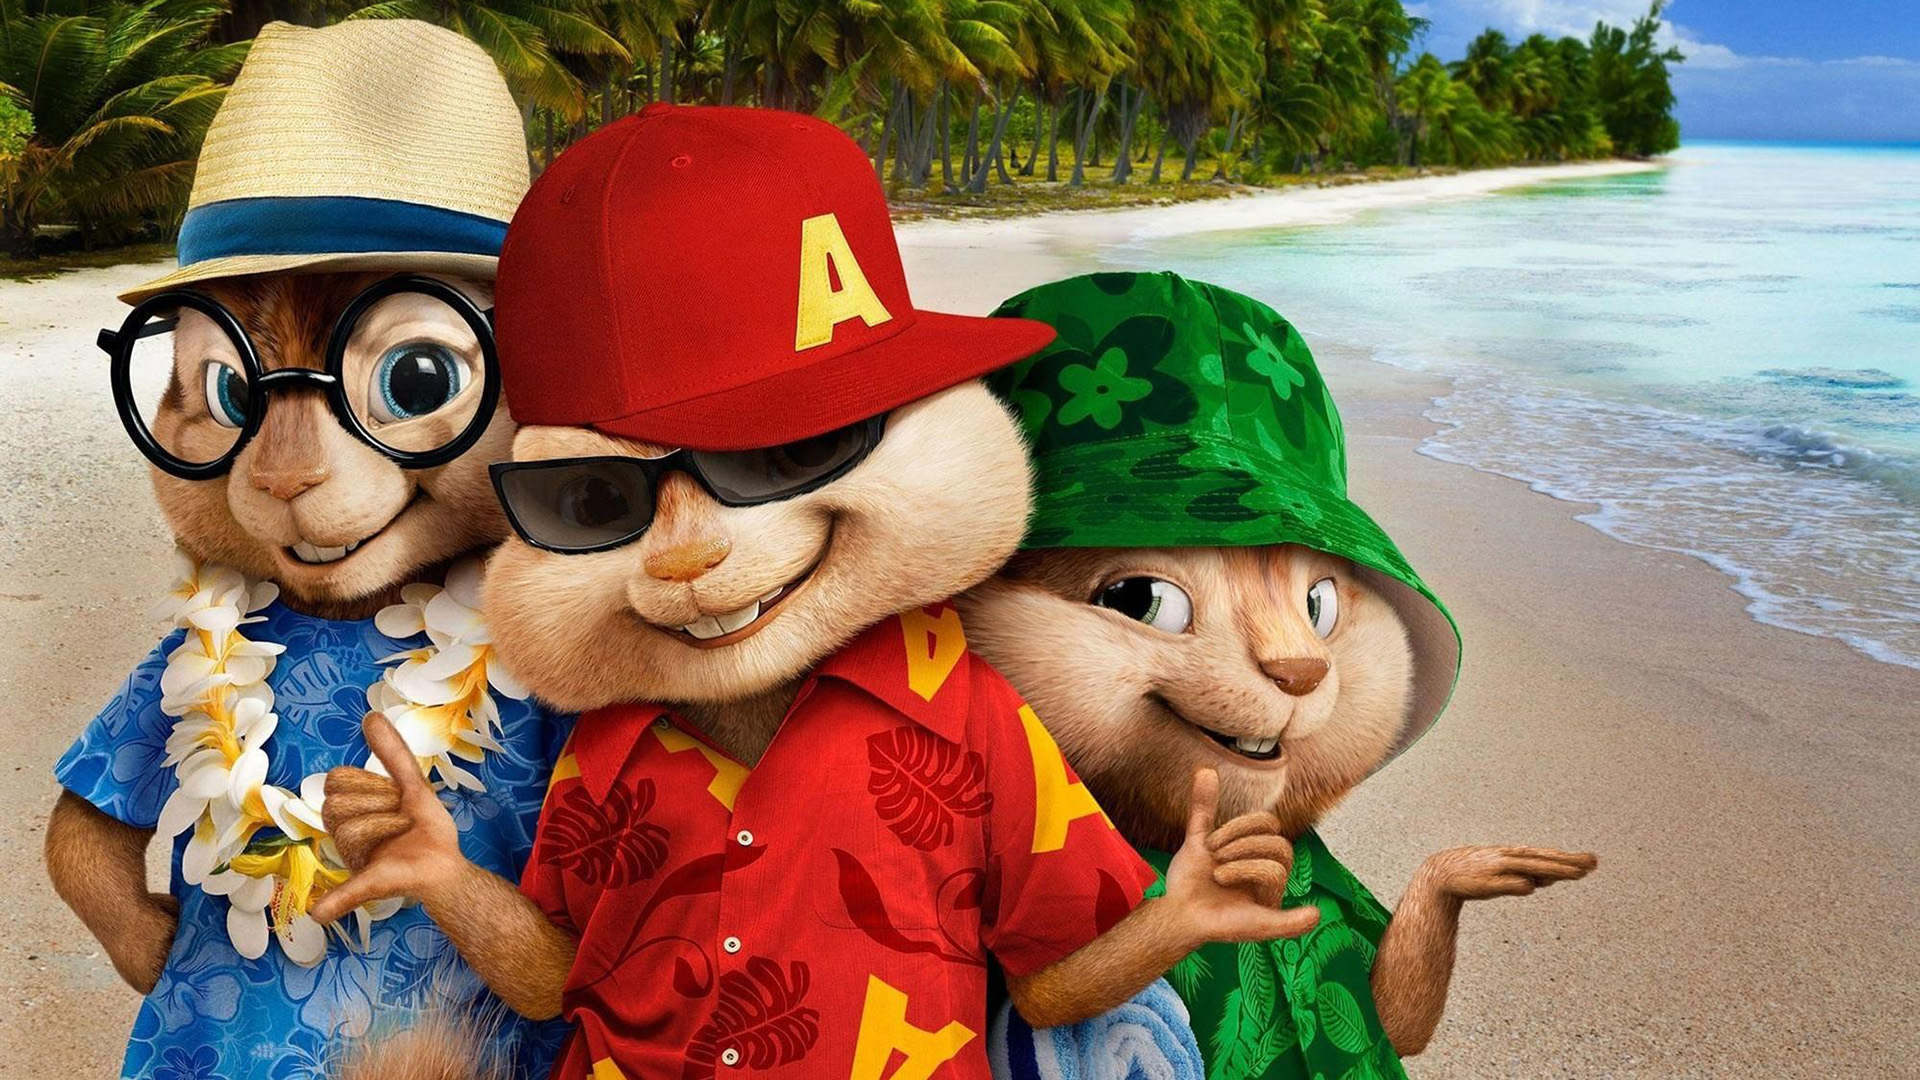 Movie Alvin and the Chipmunks: Chipwrecked HD Wallpaper | Background Image